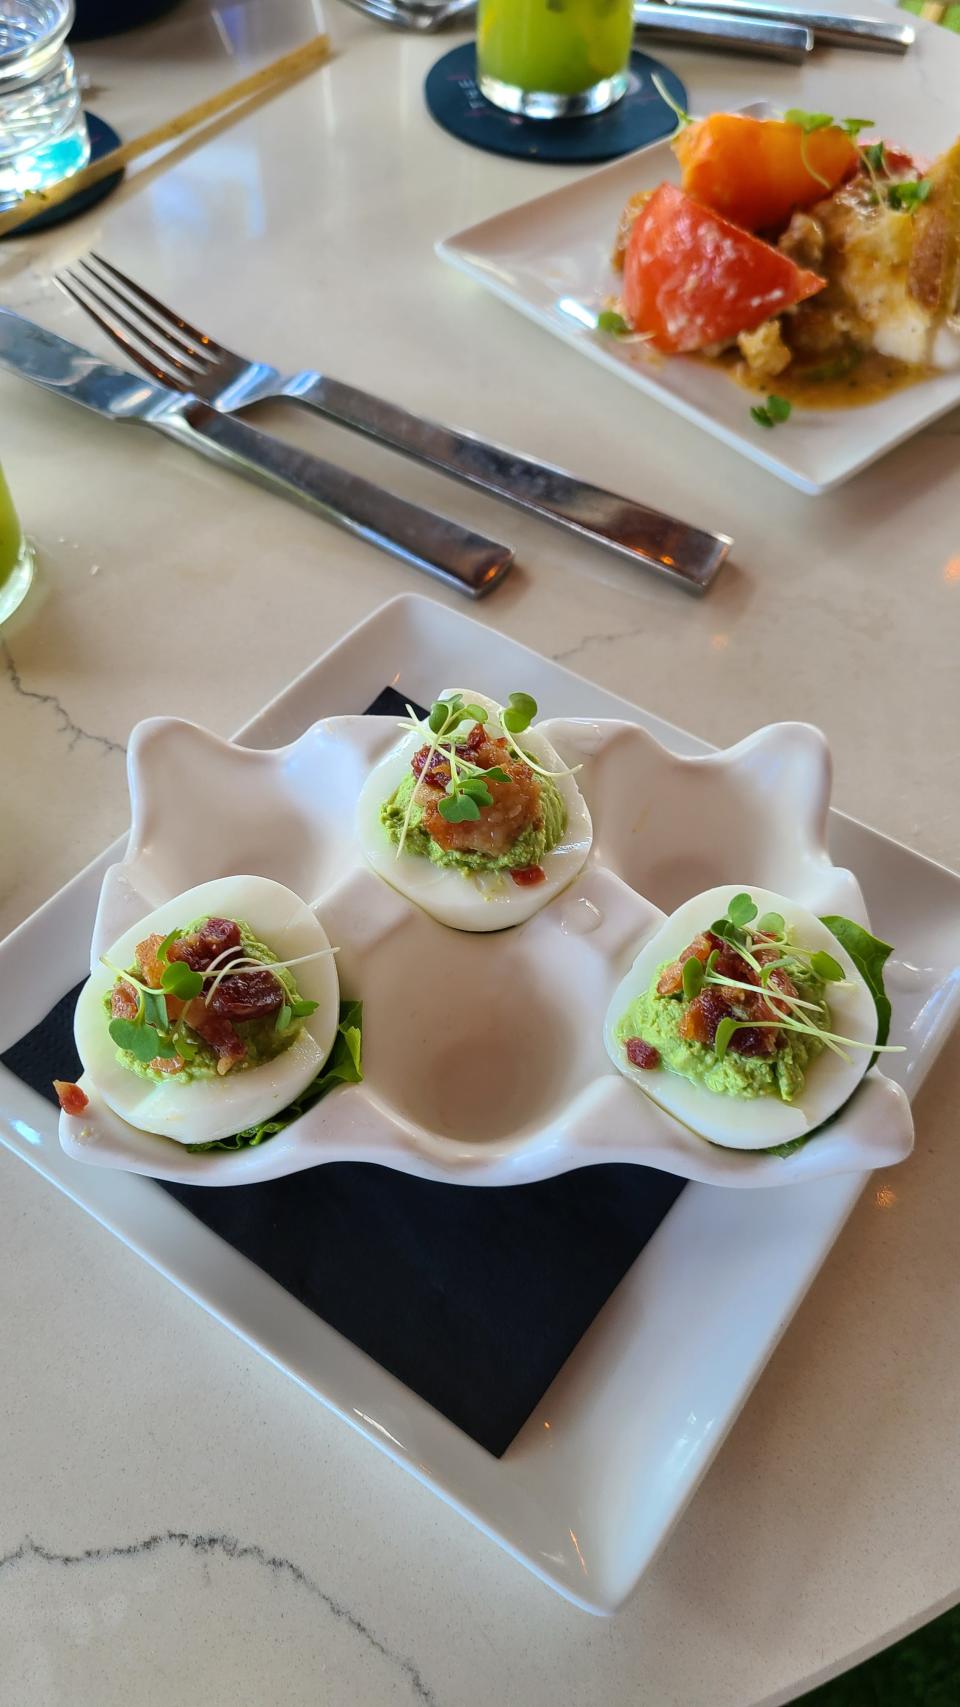 The 239's "Green Goddess" deviled eggs with candied bacon.